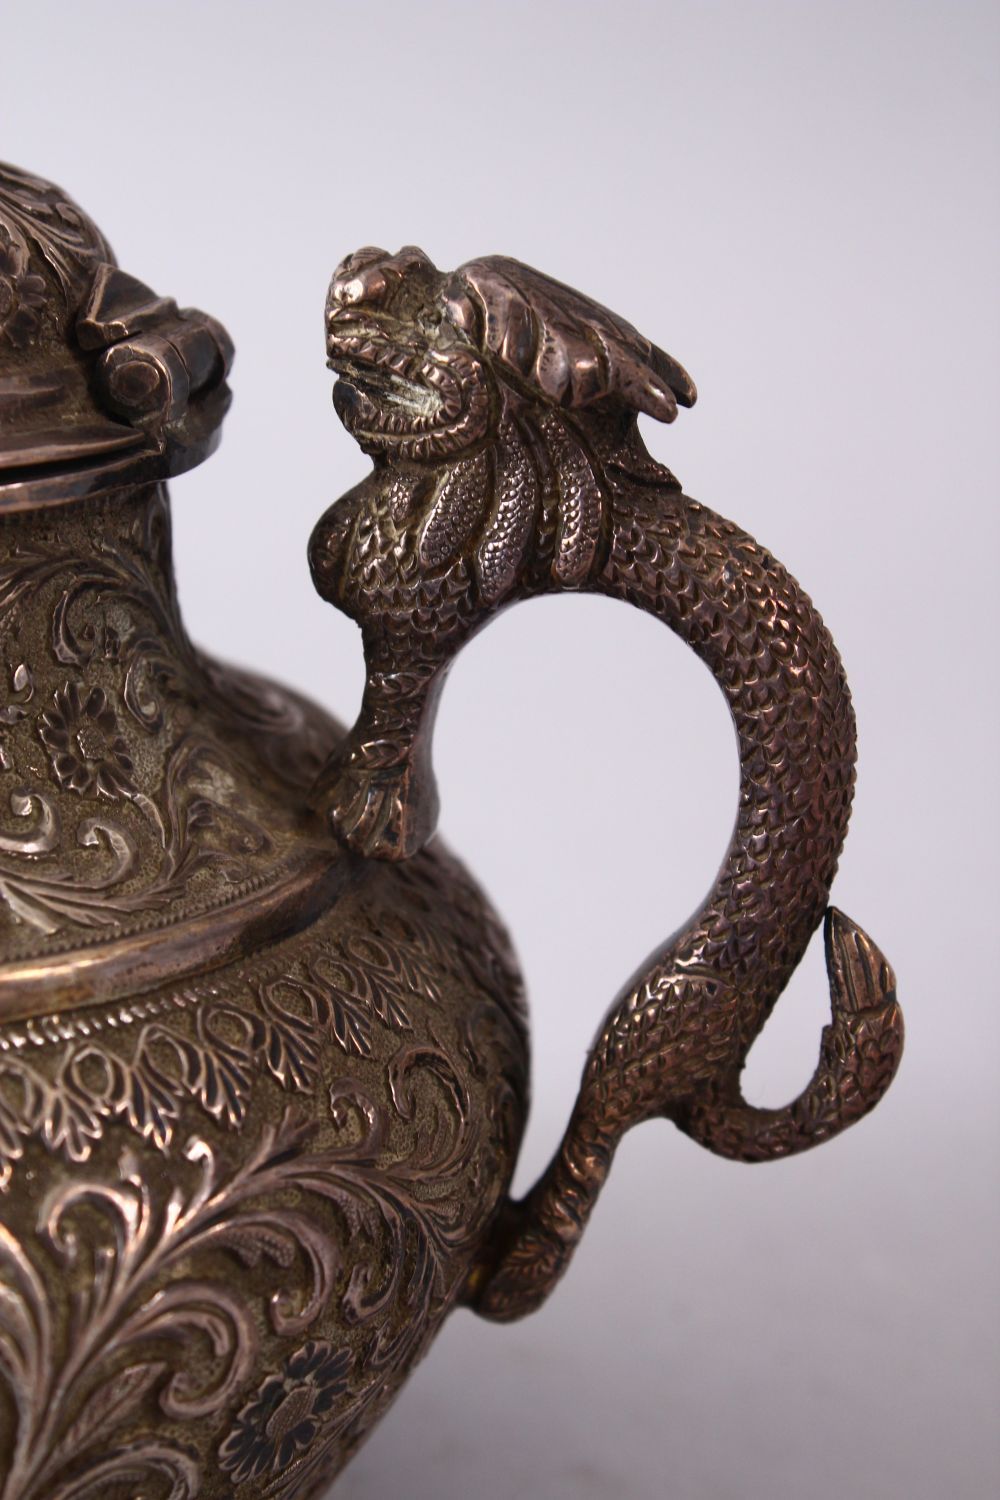 A GOOD 19TH CENTURY TURKISH SOLID SILVER TEAPOT carved with formal foliage and a dog style handle, - Image 5 of 10